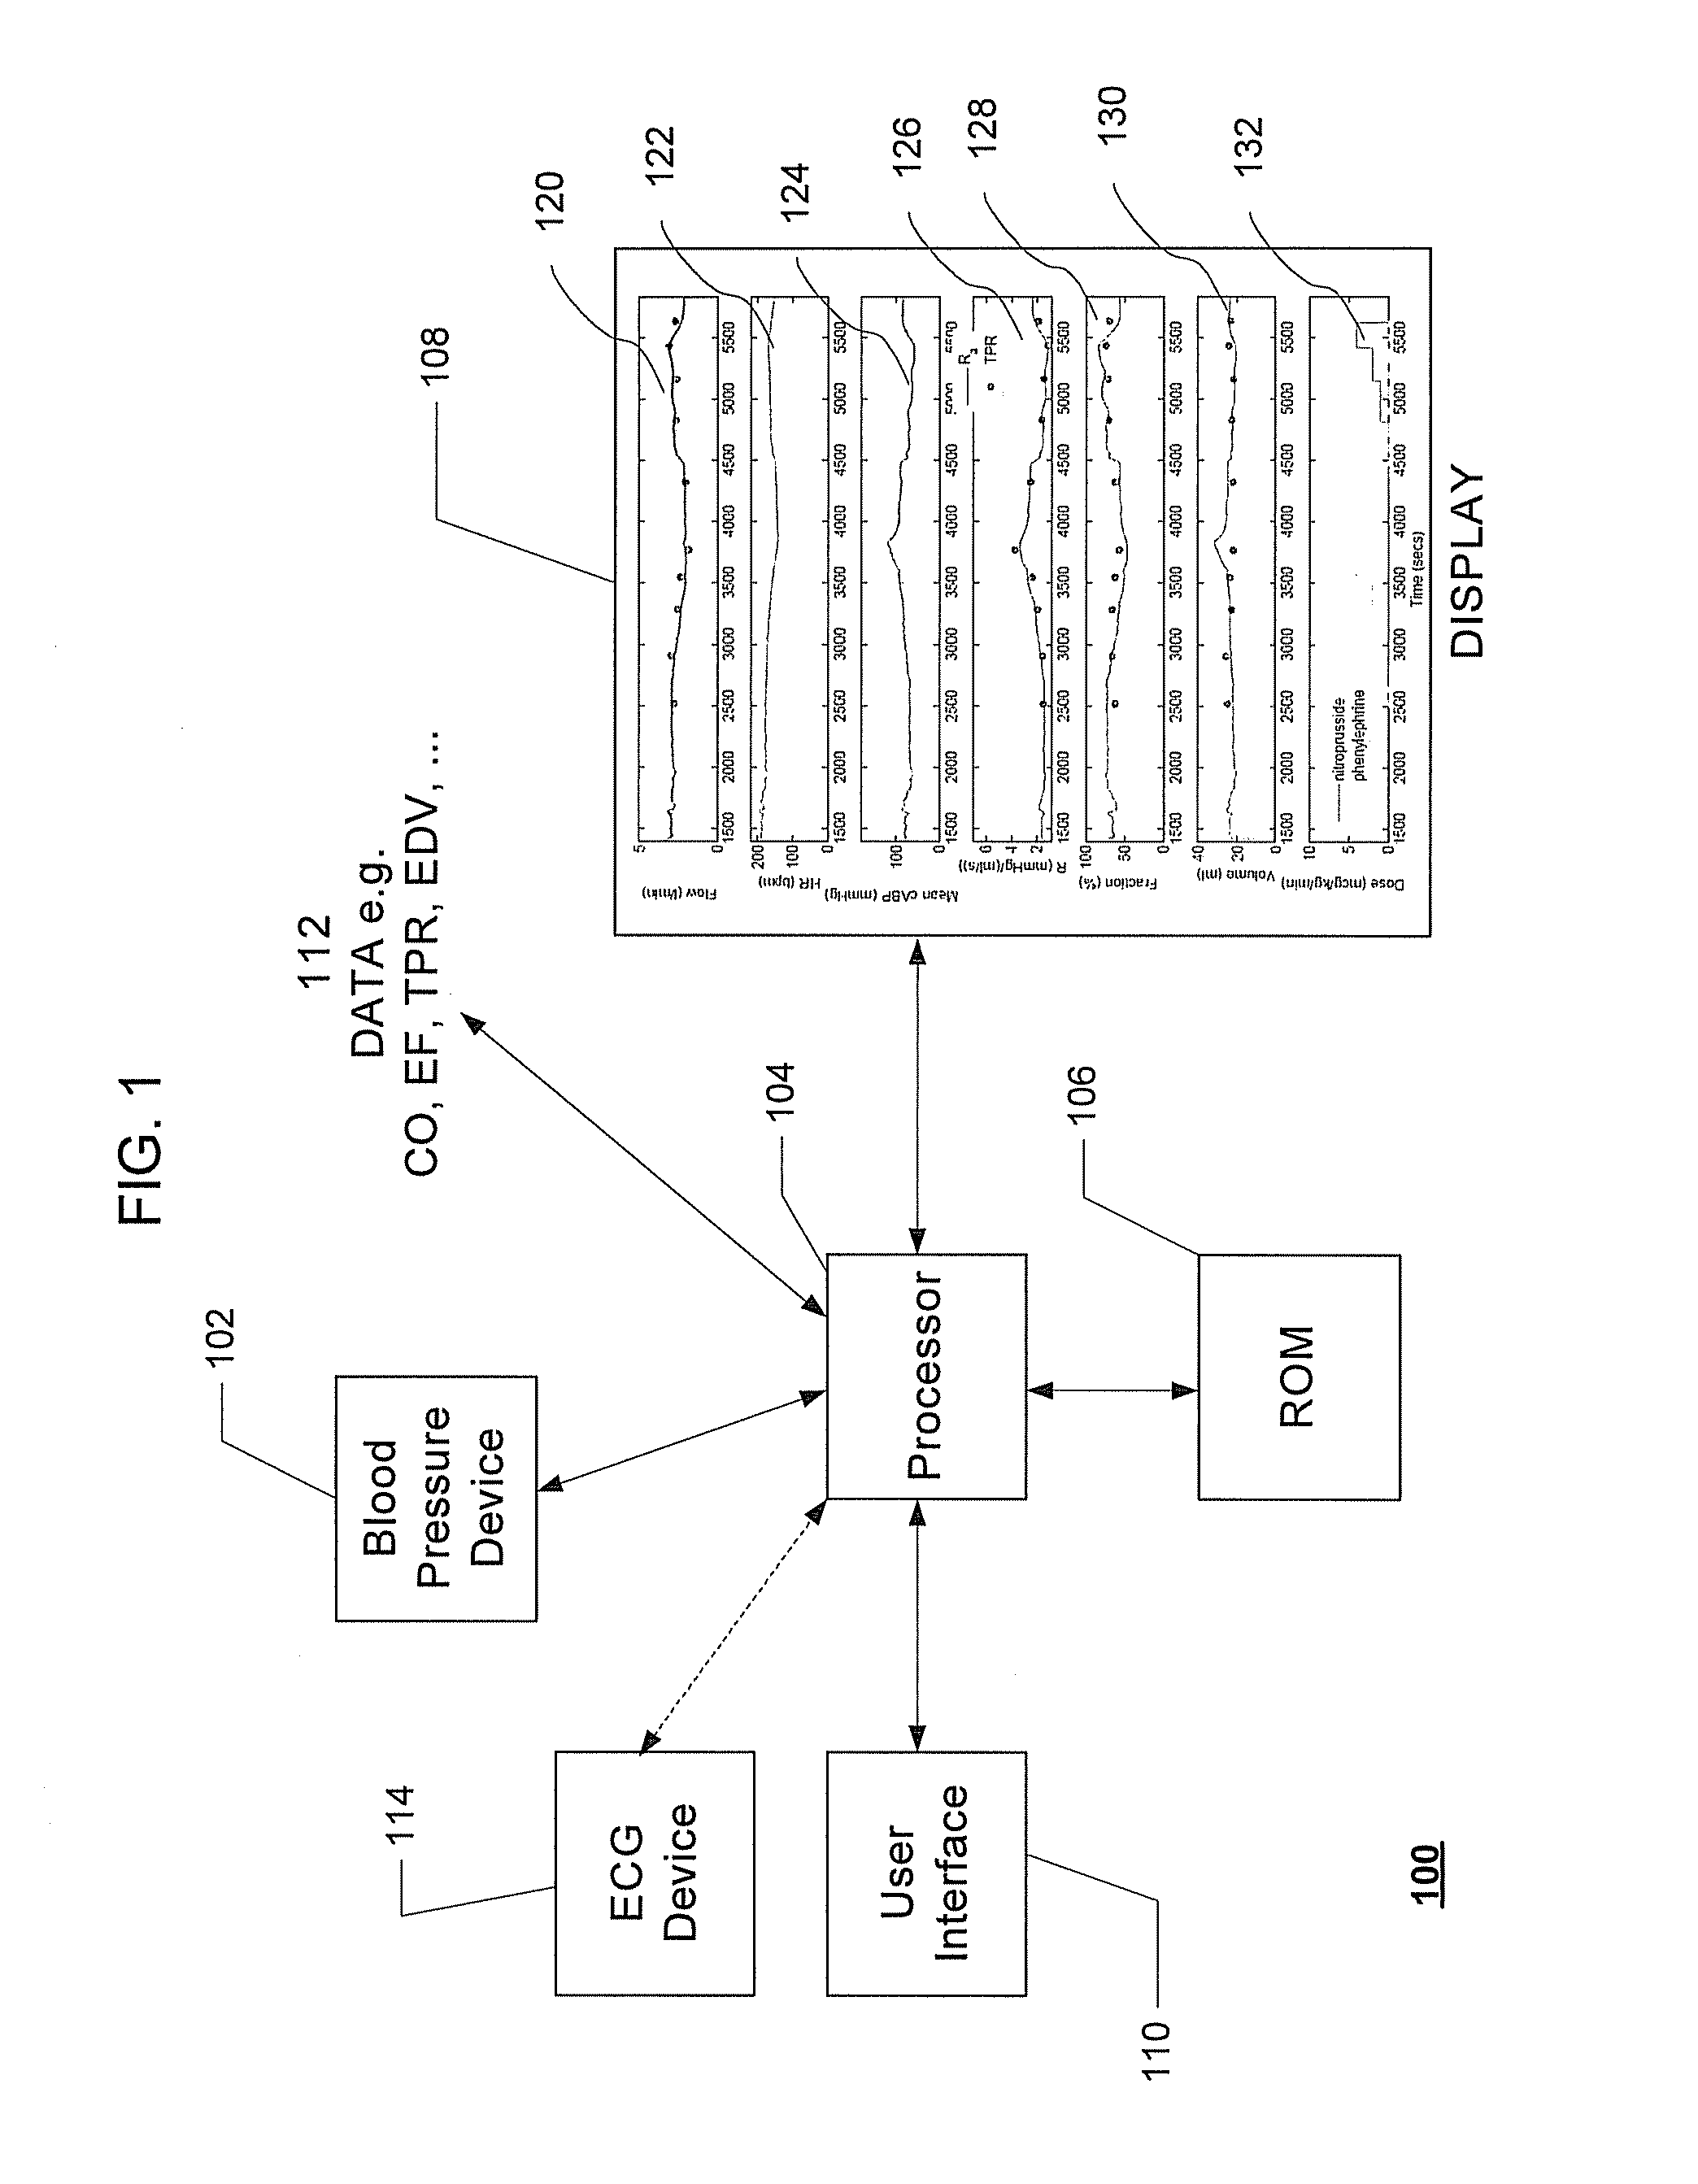 System and method for prediction and detection of circulatory shock